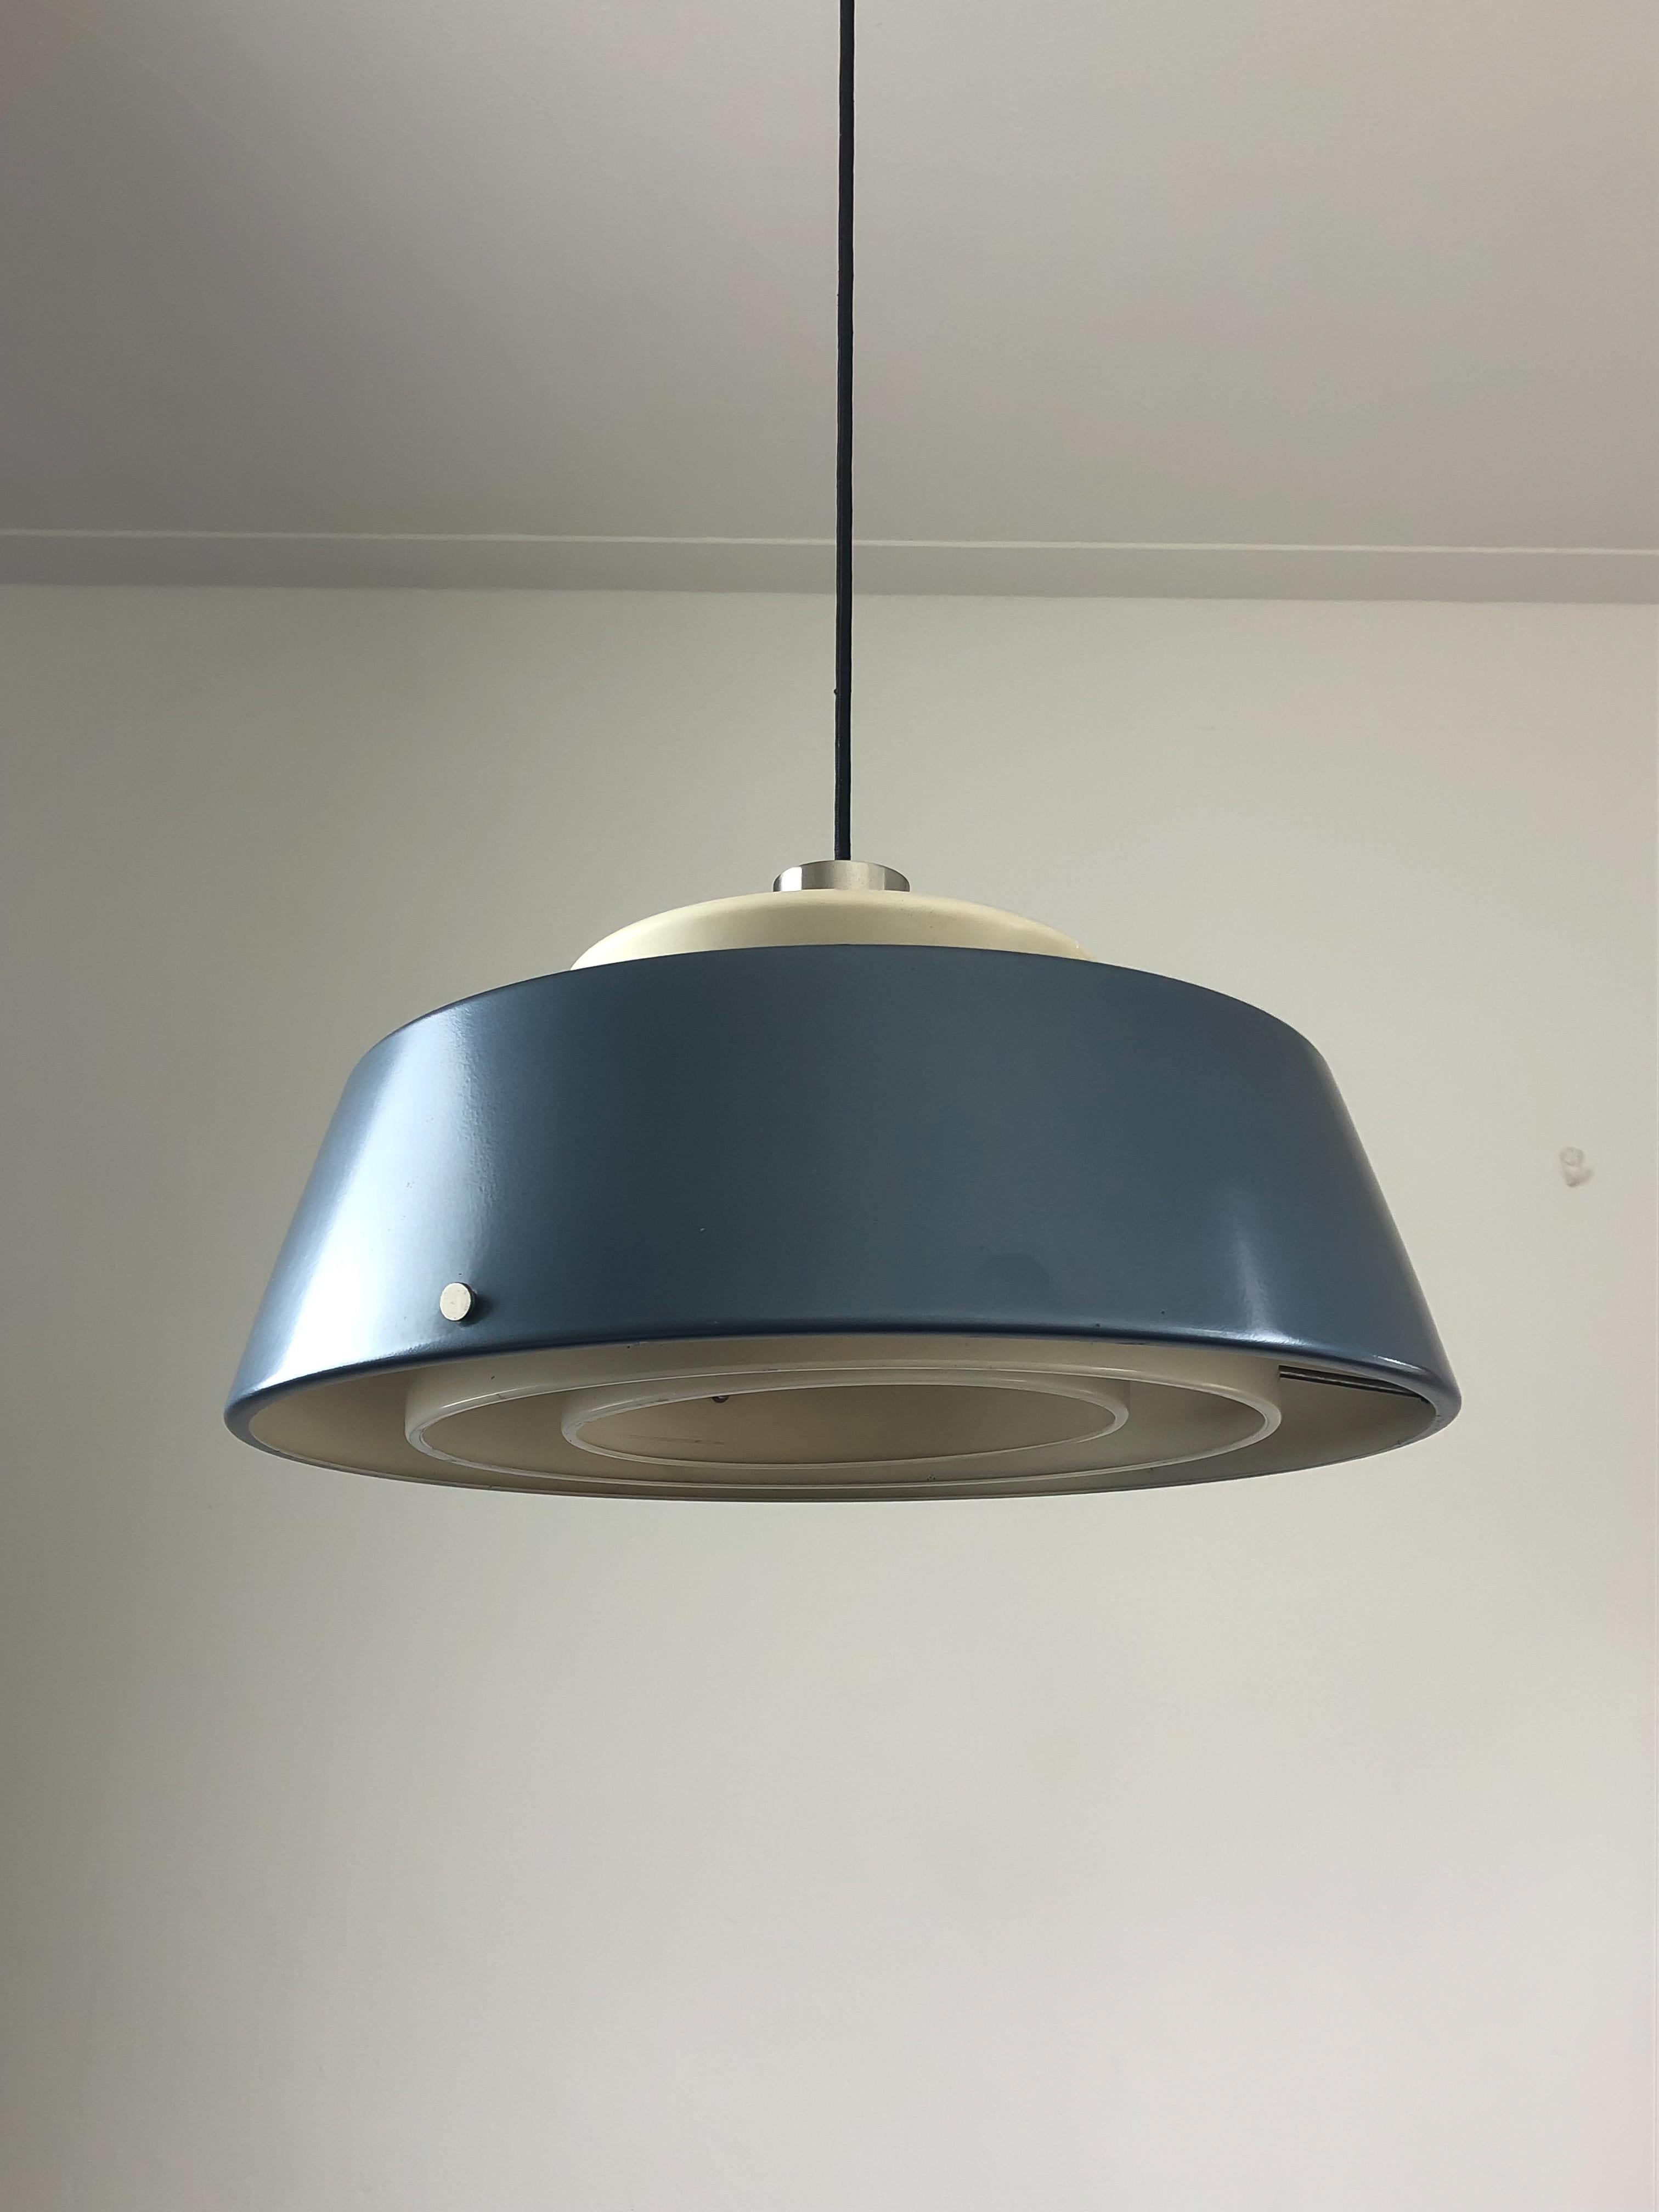 Pendant lamp made by the Italian lighting manufacturer Stilnovo at the beginning of the 1960s. The design of this lamp features a metallic blue lacquered shade that holds multiple white structures on the inside. The lamp spreads the light upwards